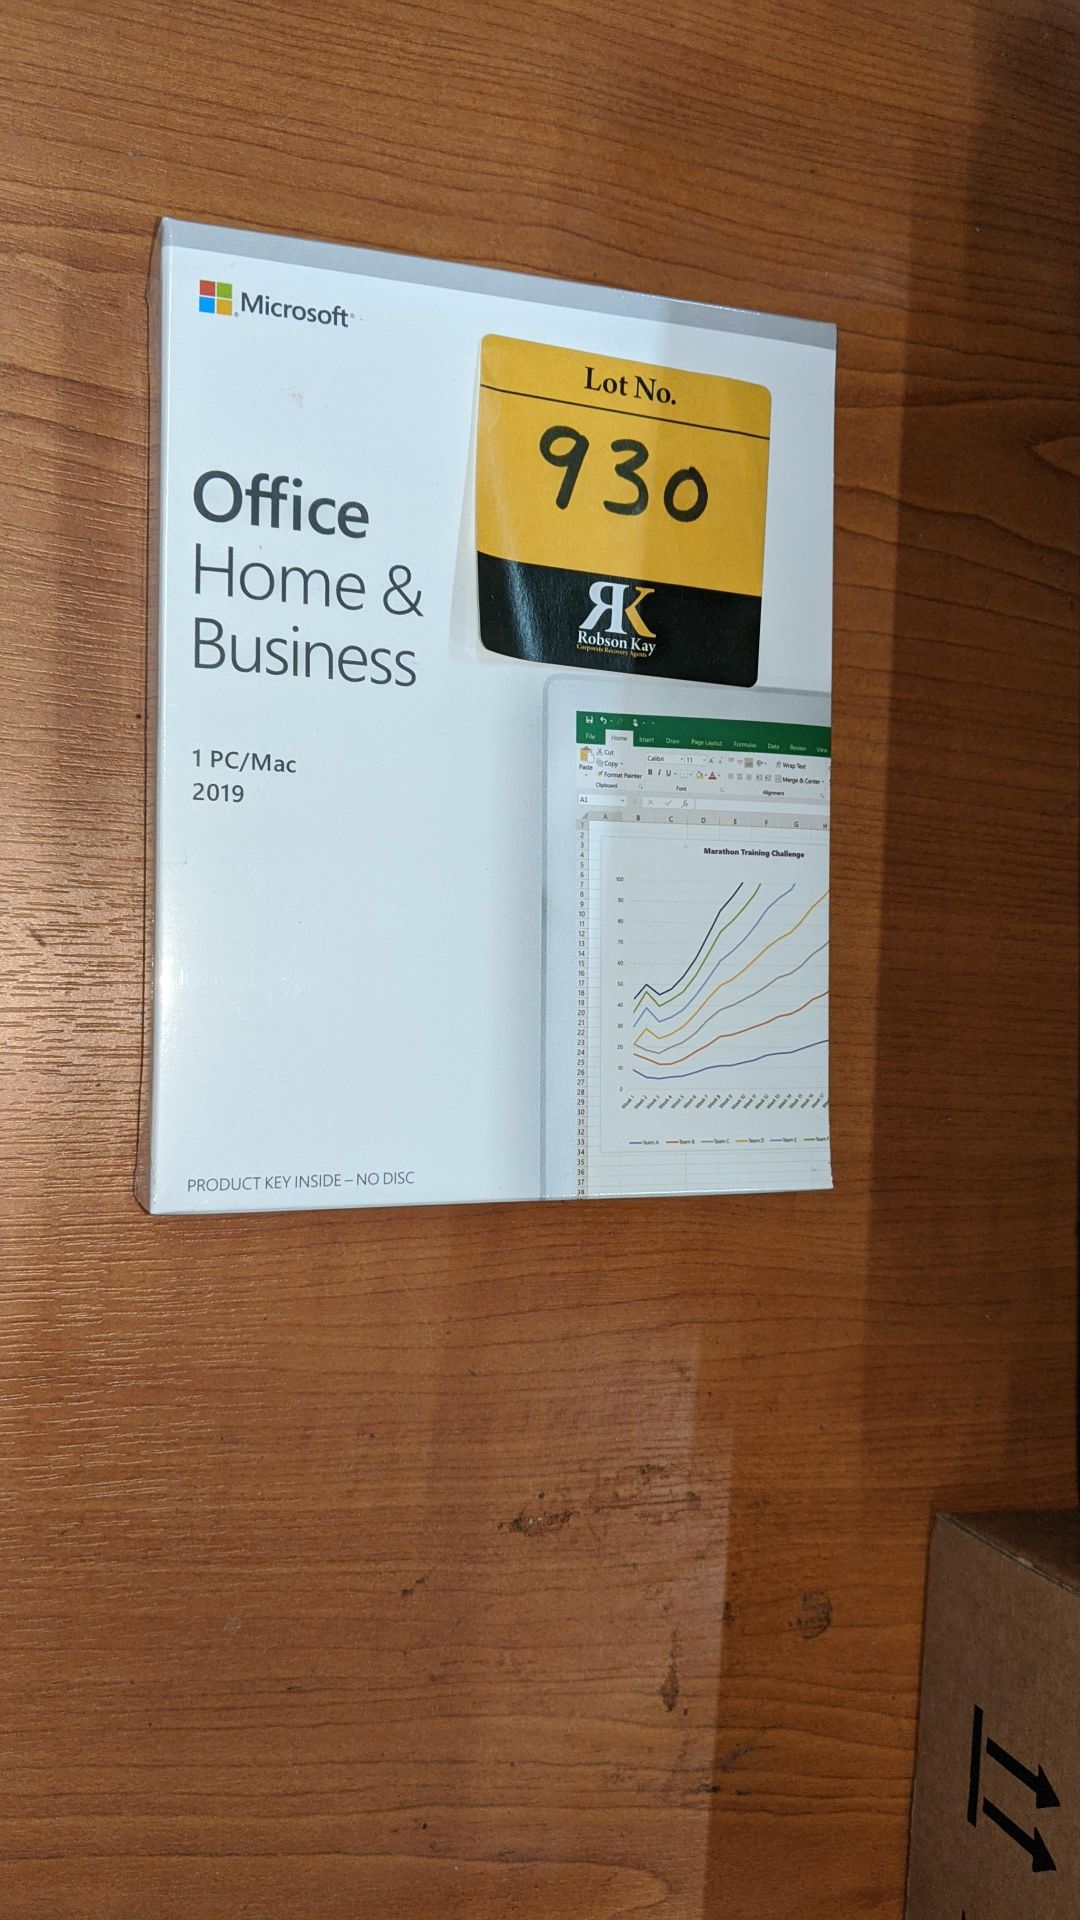 Microsoft Office Home & Business 2019 for PC/MAC. This lot comprises a sealed box with licence